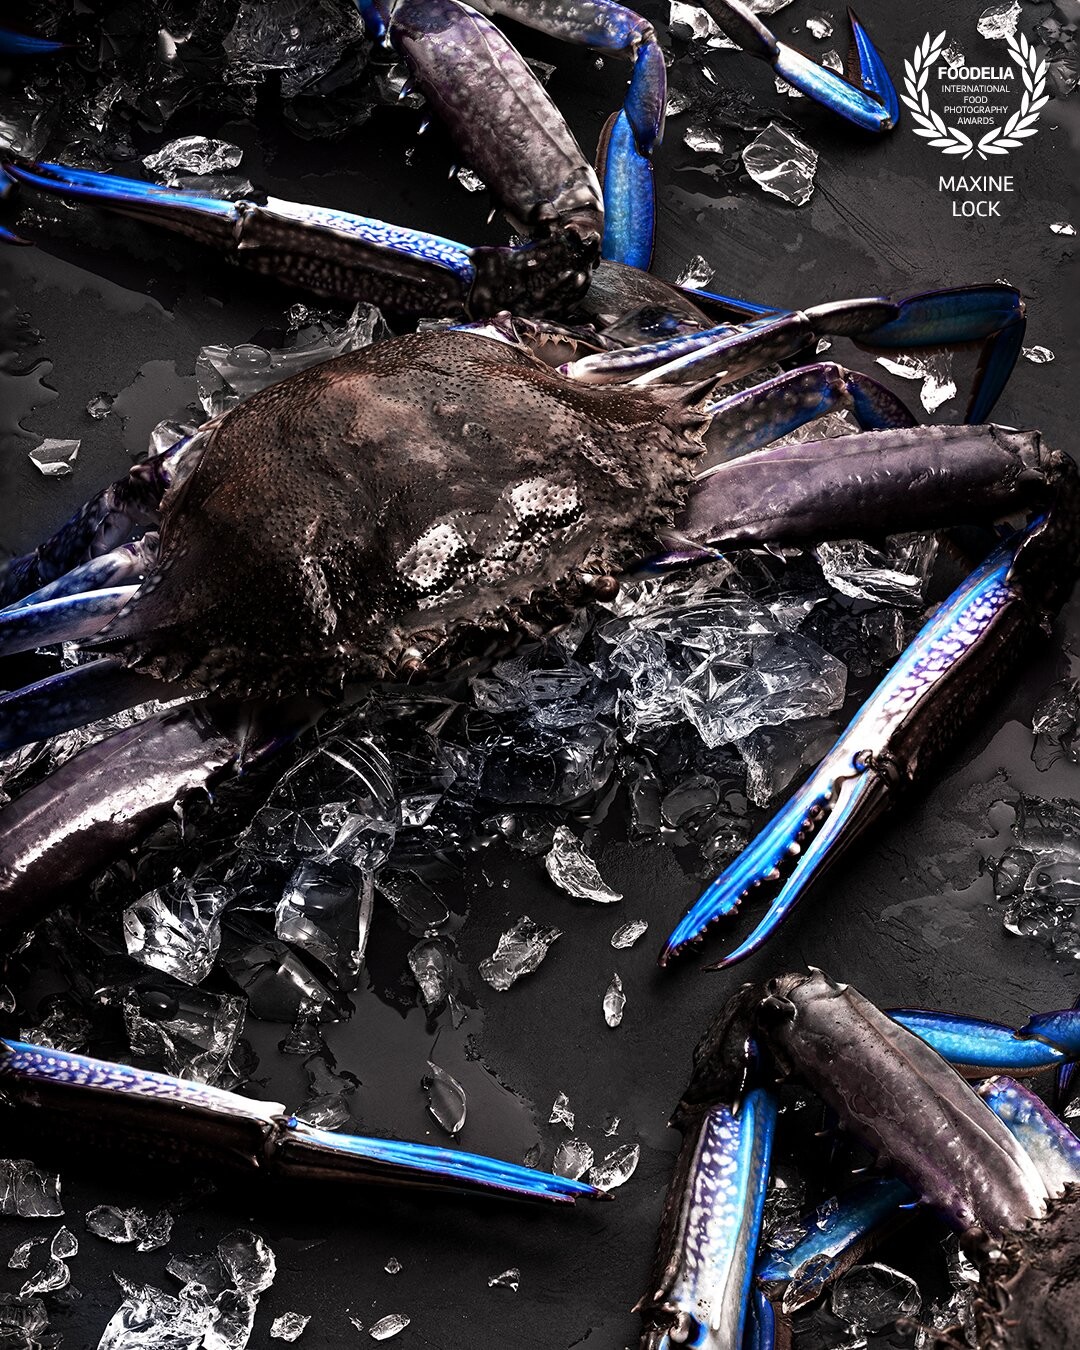 I love the blue colours on the blue swimmer crabs, so I thought I would do a personal project with them, and really focus in on the blue colours while darkening the other parts of both the crabs and the image itself.